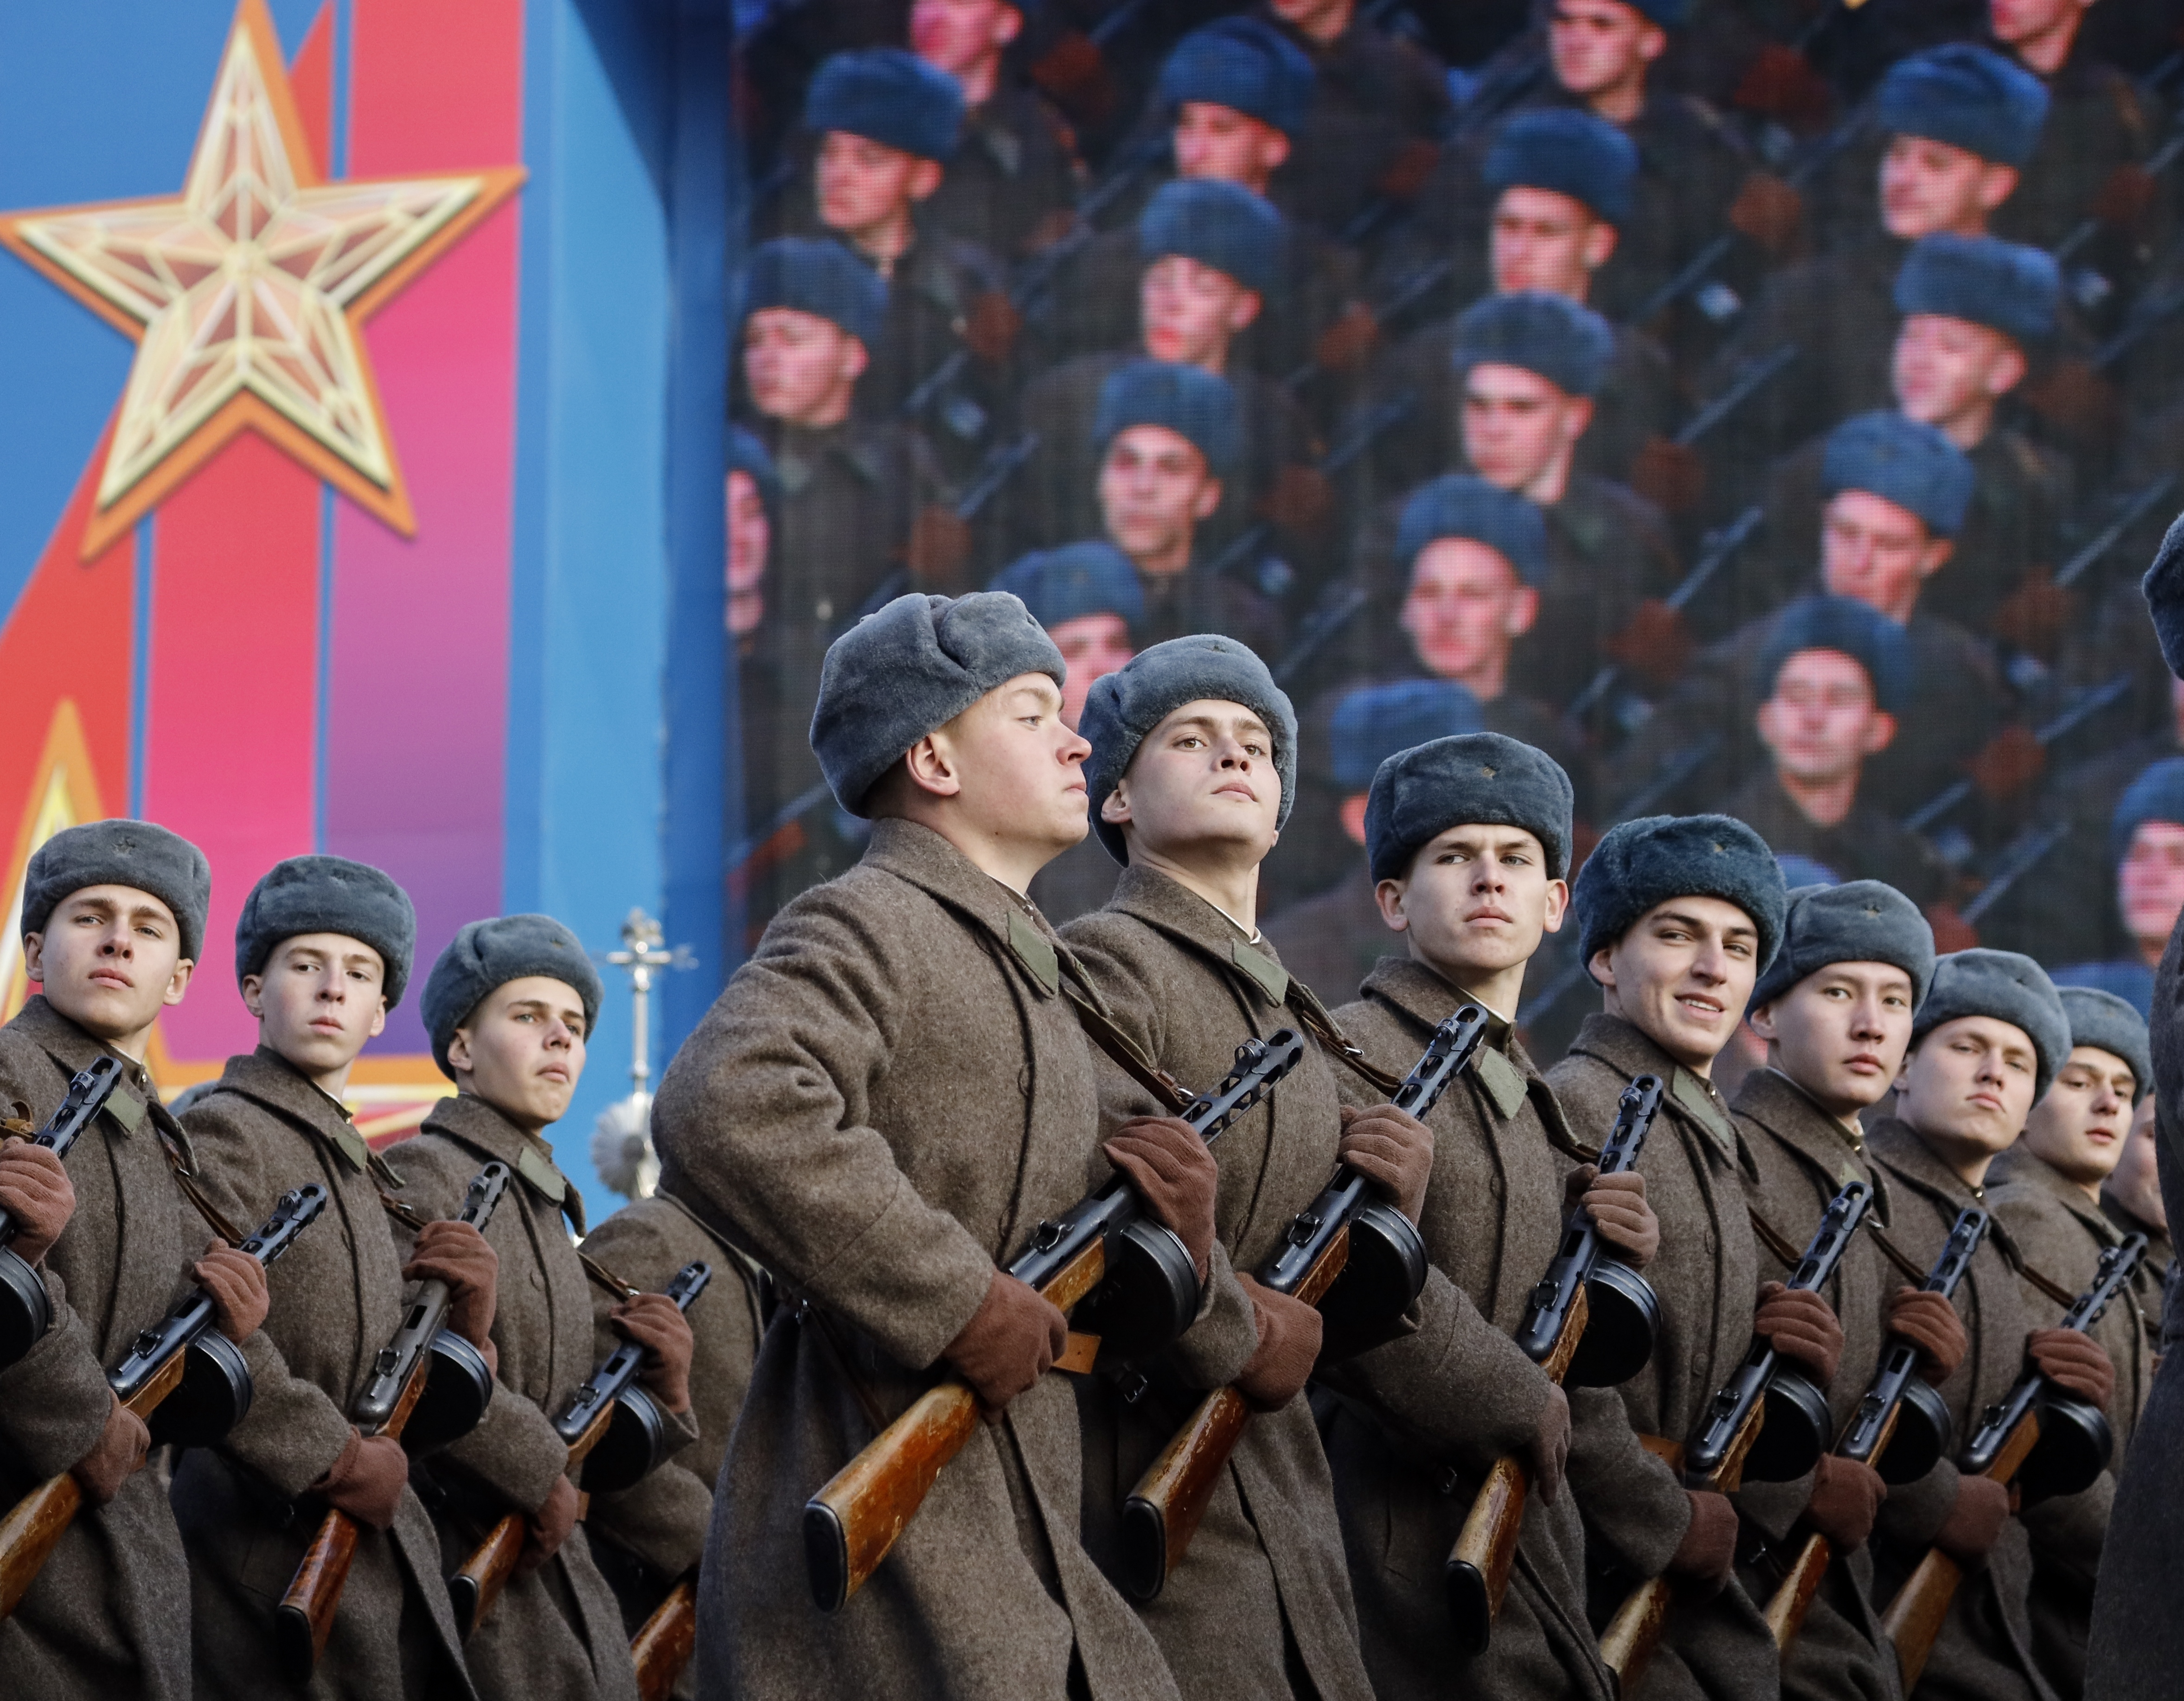 Russian soldiers dressed in Red Army World War II uniforms march during the Nov. 7 parade in Red Square, in Moscow, Russia, Wednesday, Nov. 7, 2018. The event marked the 77th anniversary of a World War II historic parade in Red Square and honored the participants in the Nov. 7, 1941 parade who headed directly to the front lines to defend Moscow from the Nazi forces. (AP Photo/Alexander Zemlianichenko)